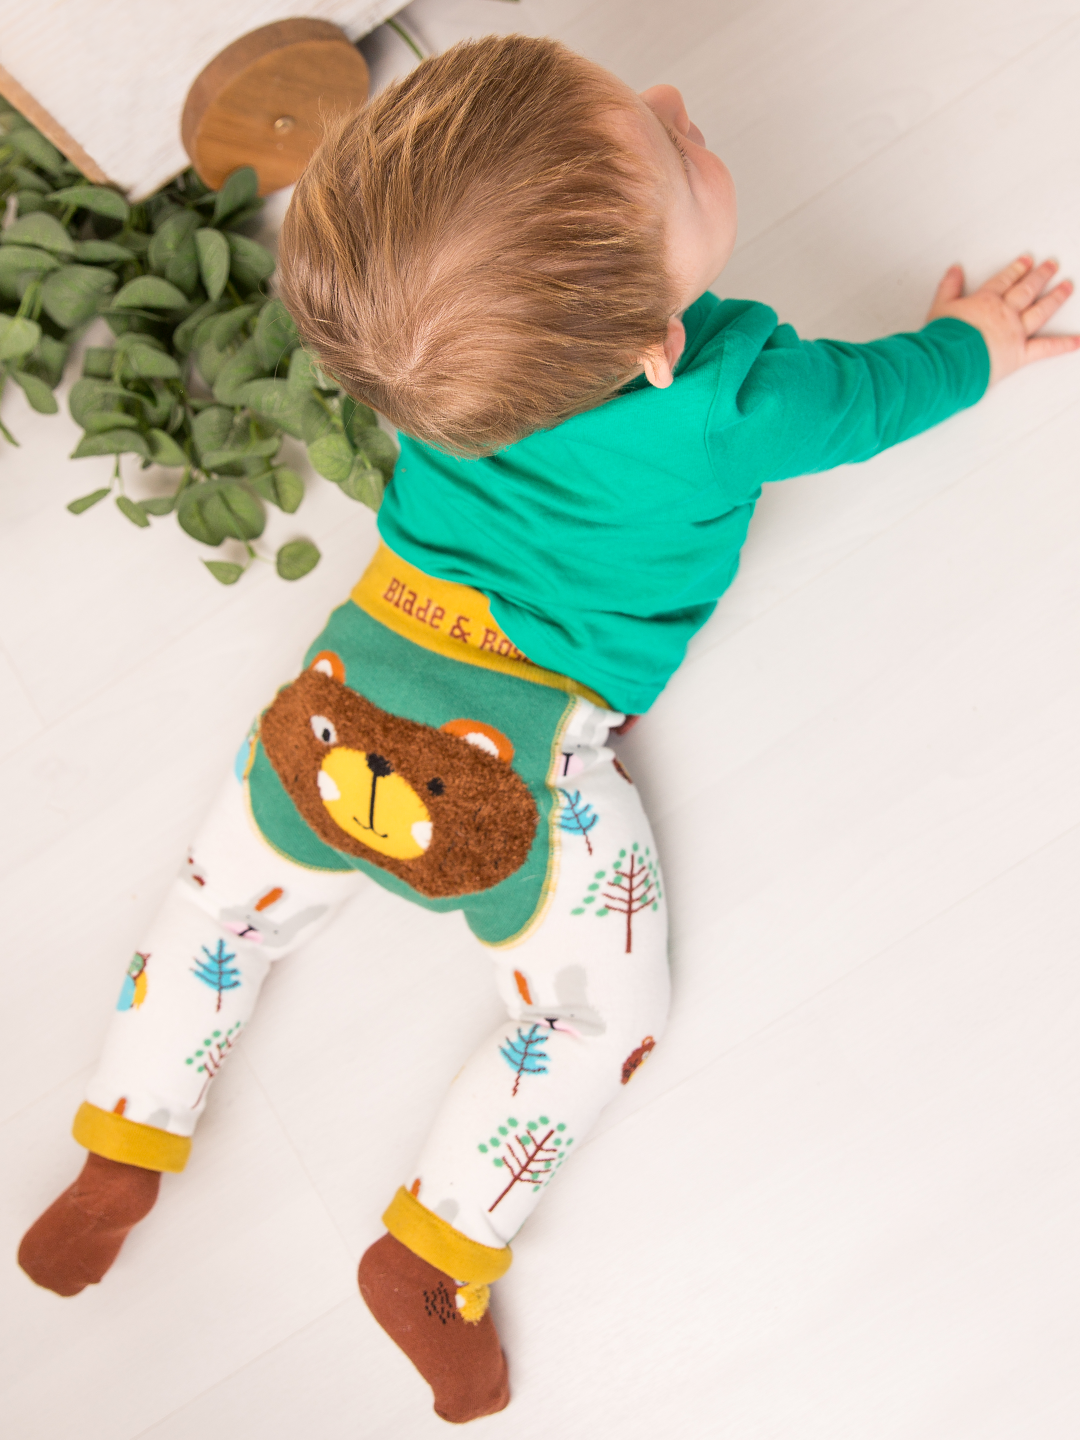 Wild Woodland Outfit (3PC)